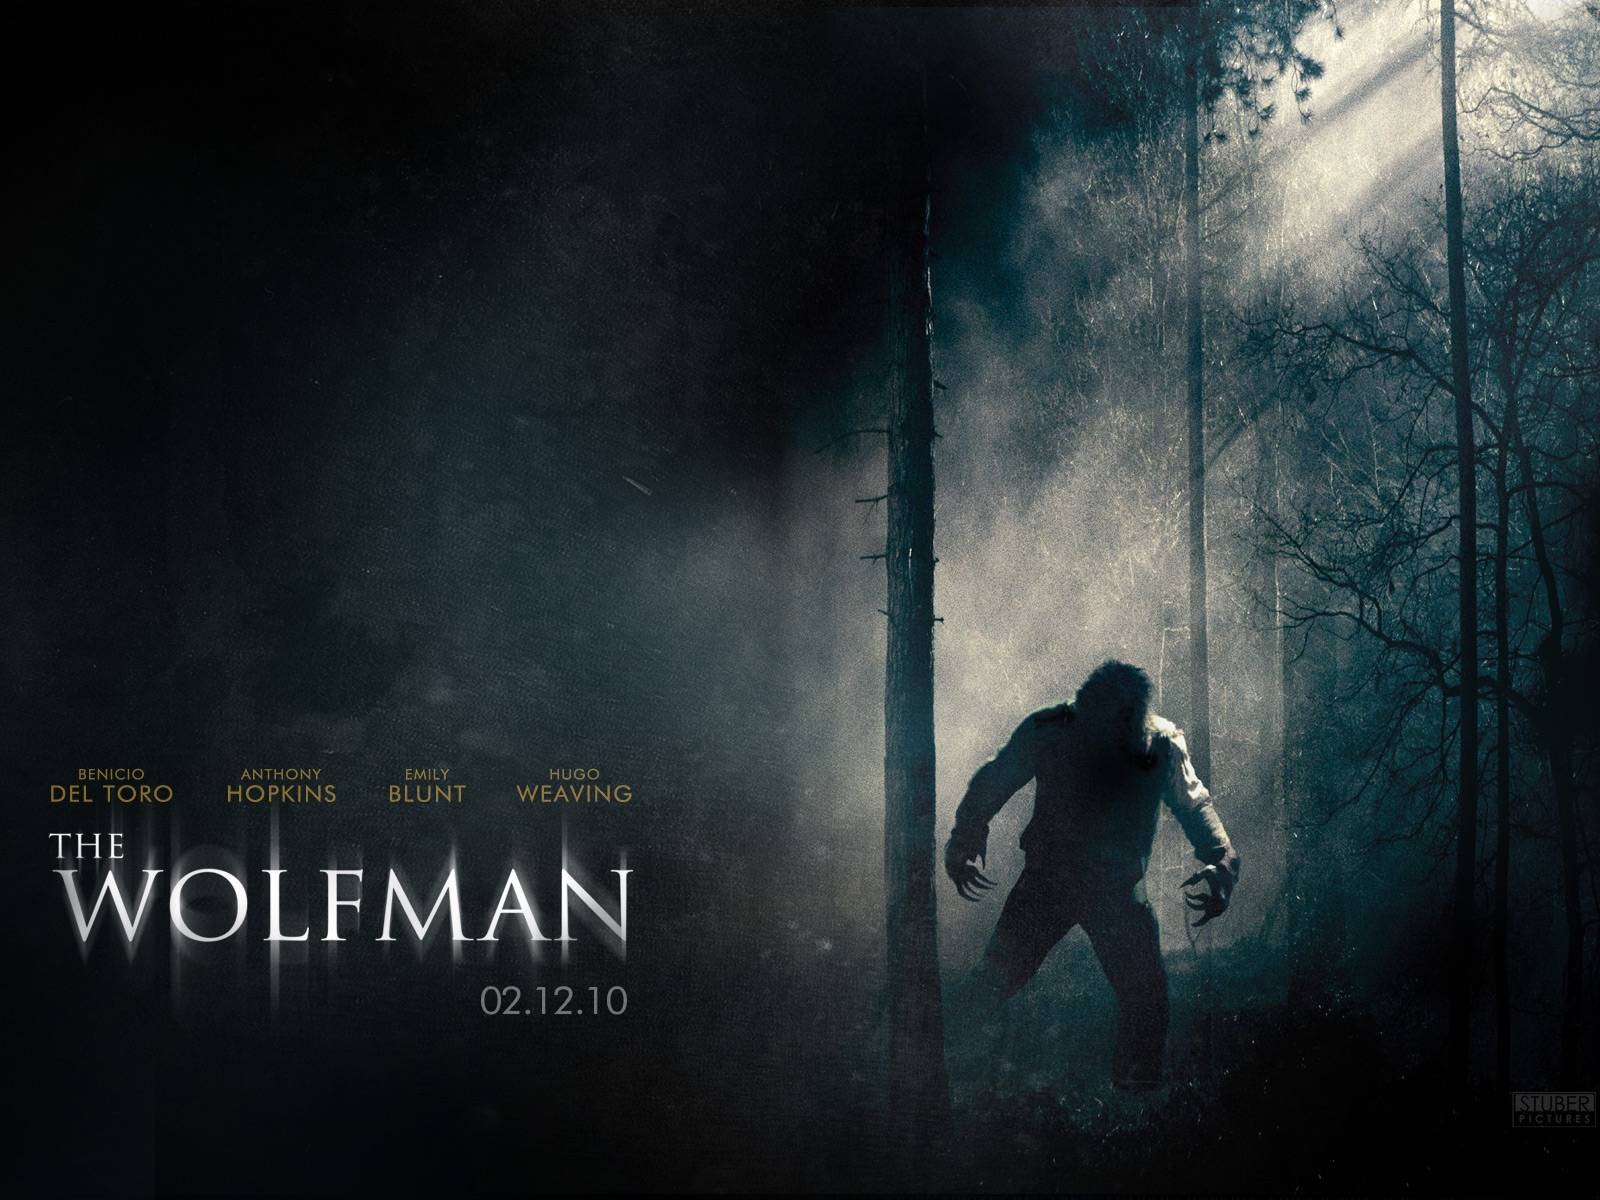 The Wolfman Movie Wallpapers #2 - 1600x1200